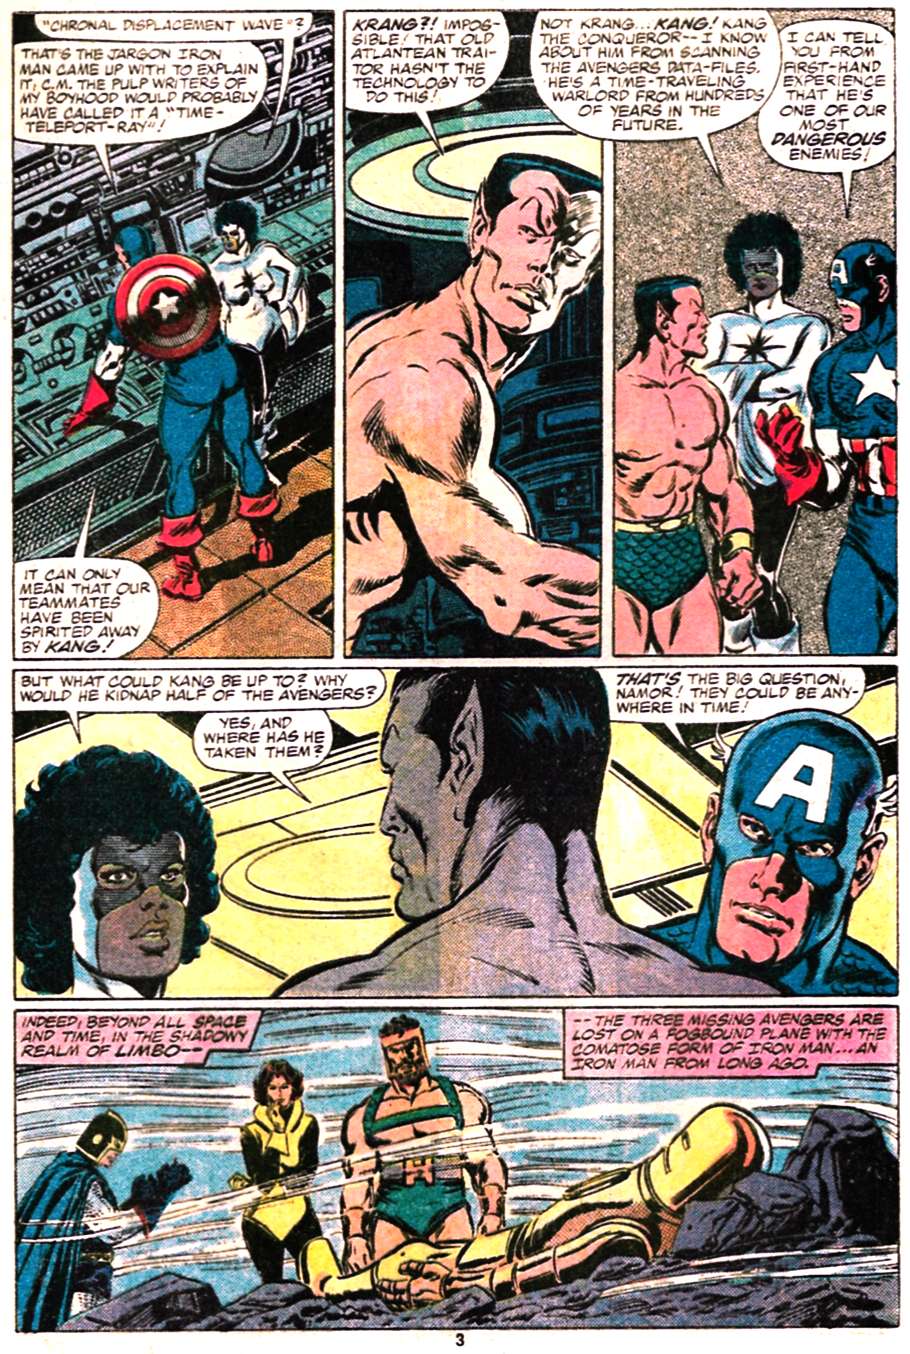 The Avengers (1963) 268 Page 3